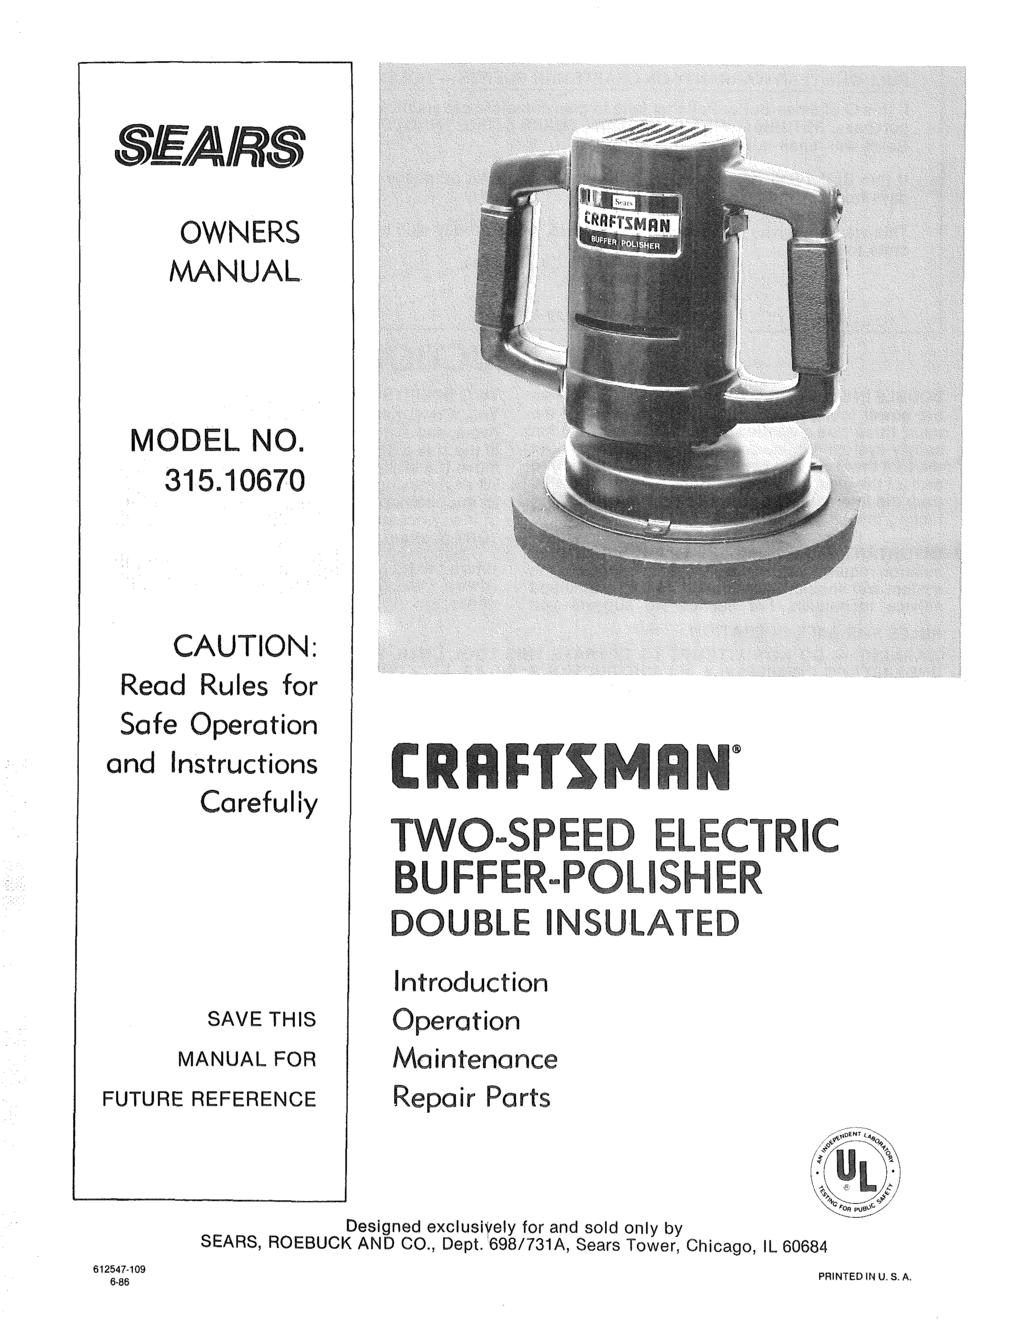 SEARS OWNERS MANUAL MODEL NO. 315.10670 CAUTION.